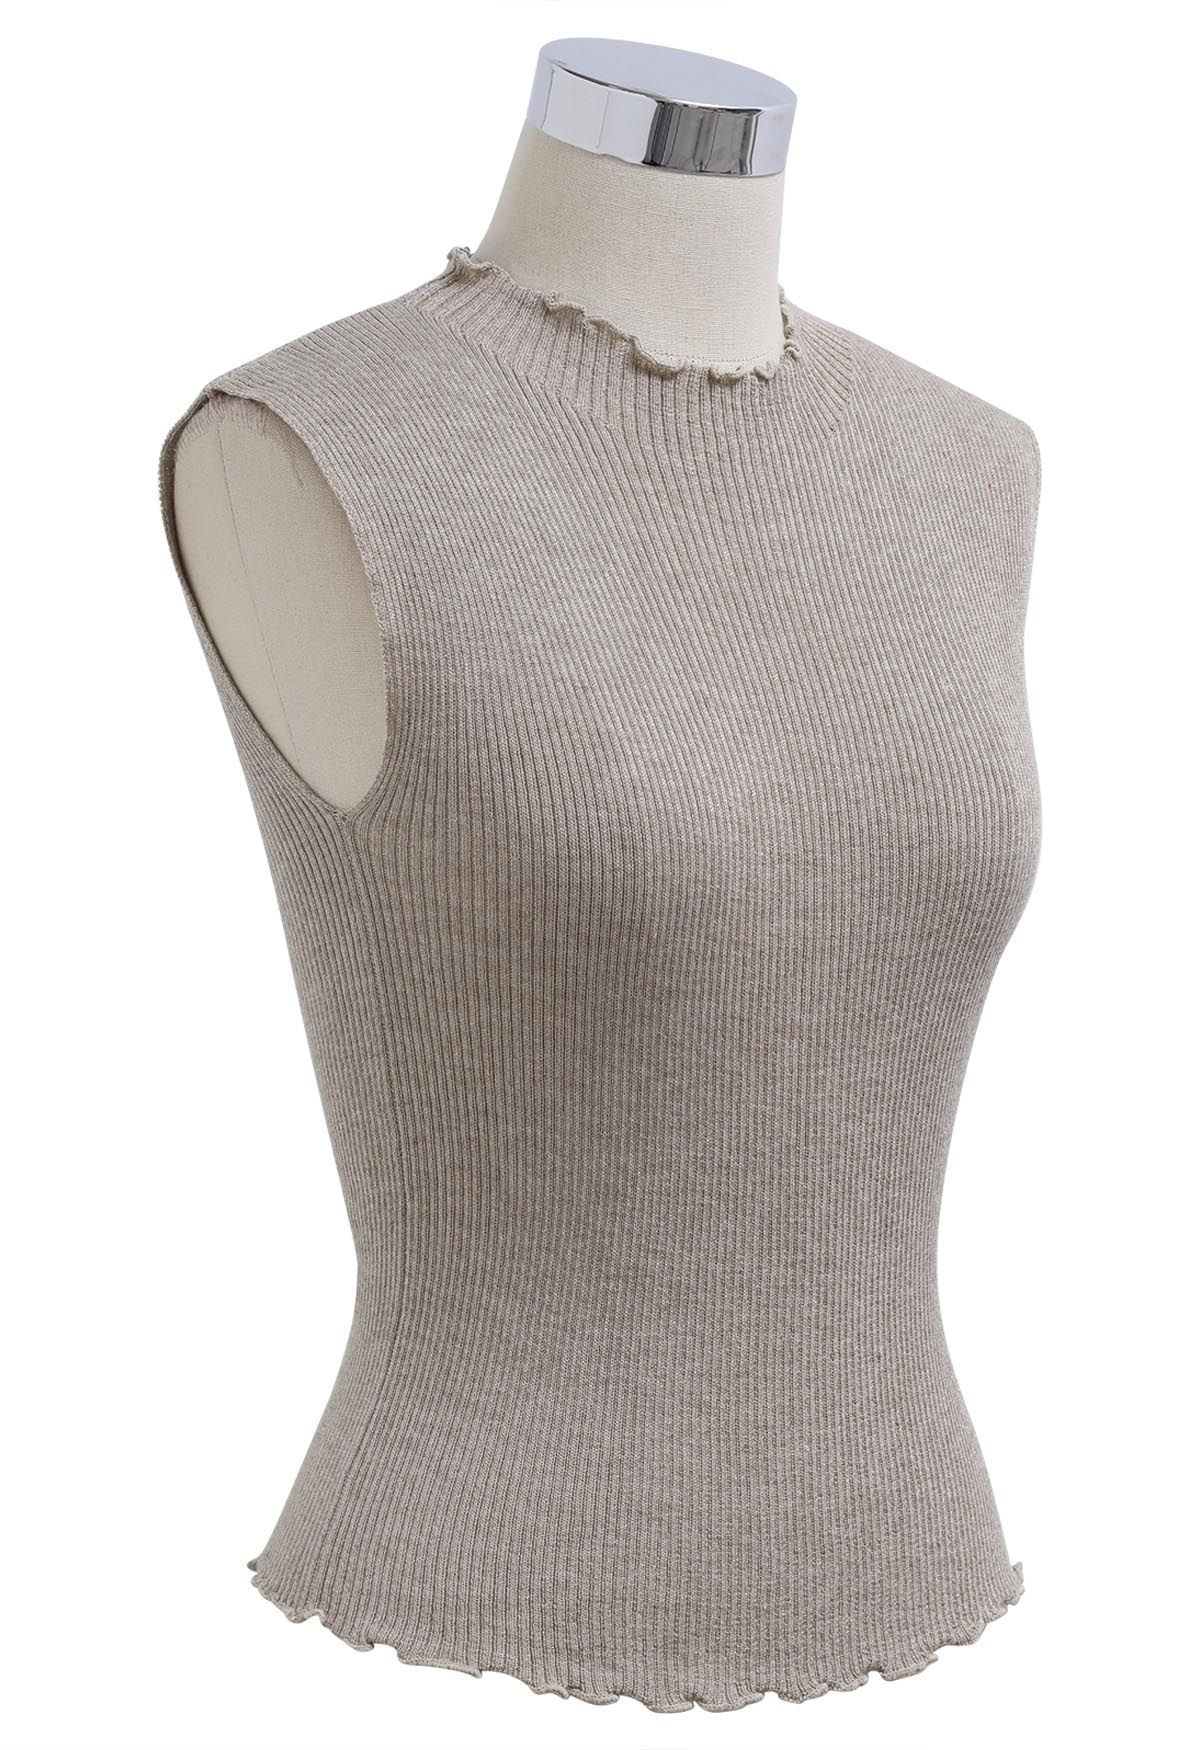 Glittery Lettuce Edge Sleeveless Knit Top in Taupe - Retro, Indie